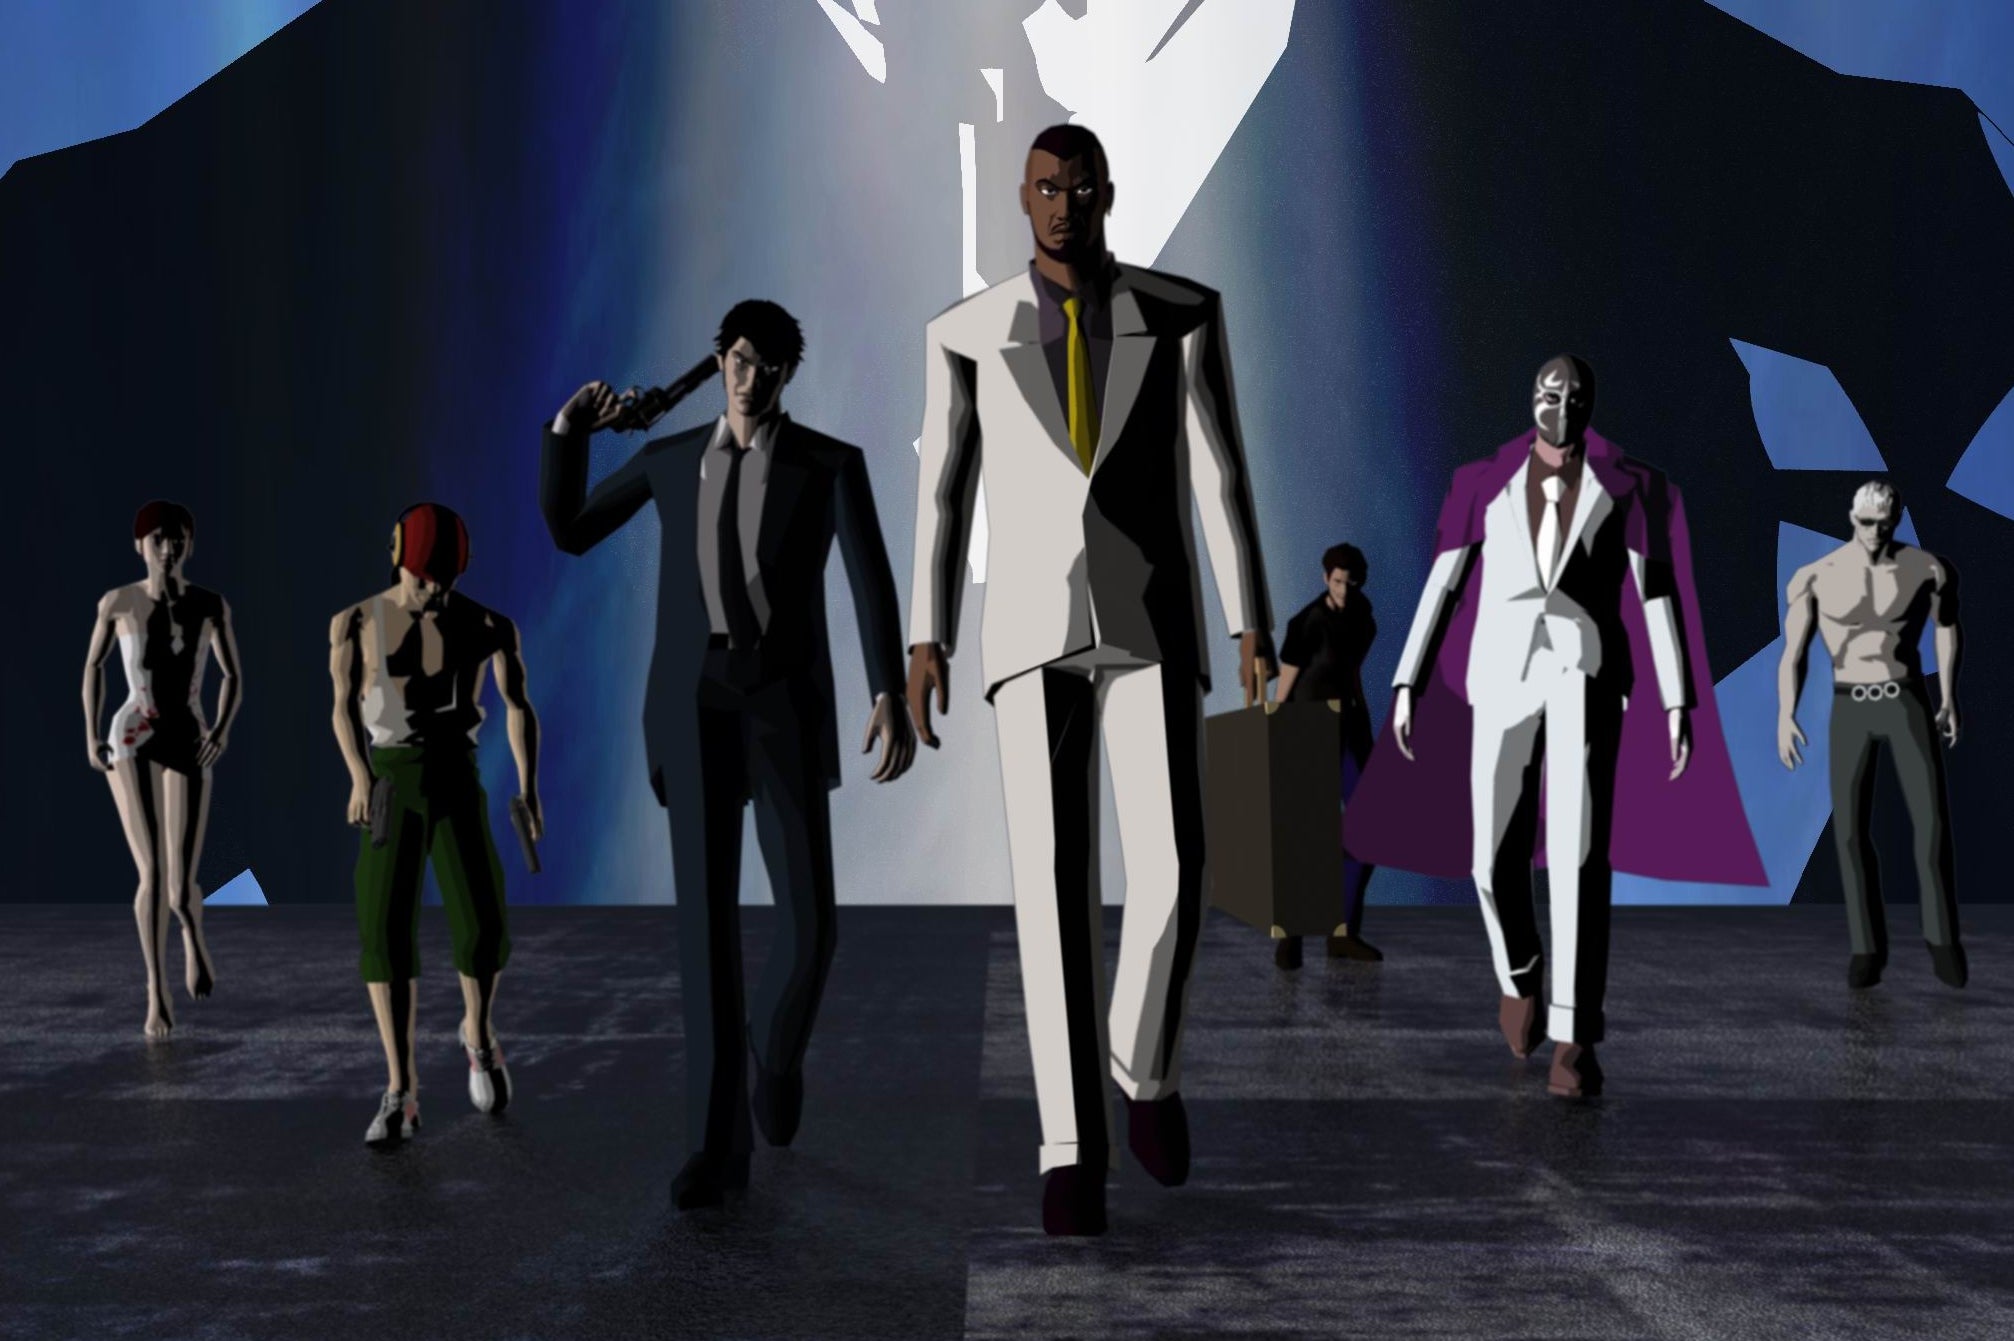 Image for Capcom's cult classic Killer7 is making a return, courtesy of Suda51's Let It Die